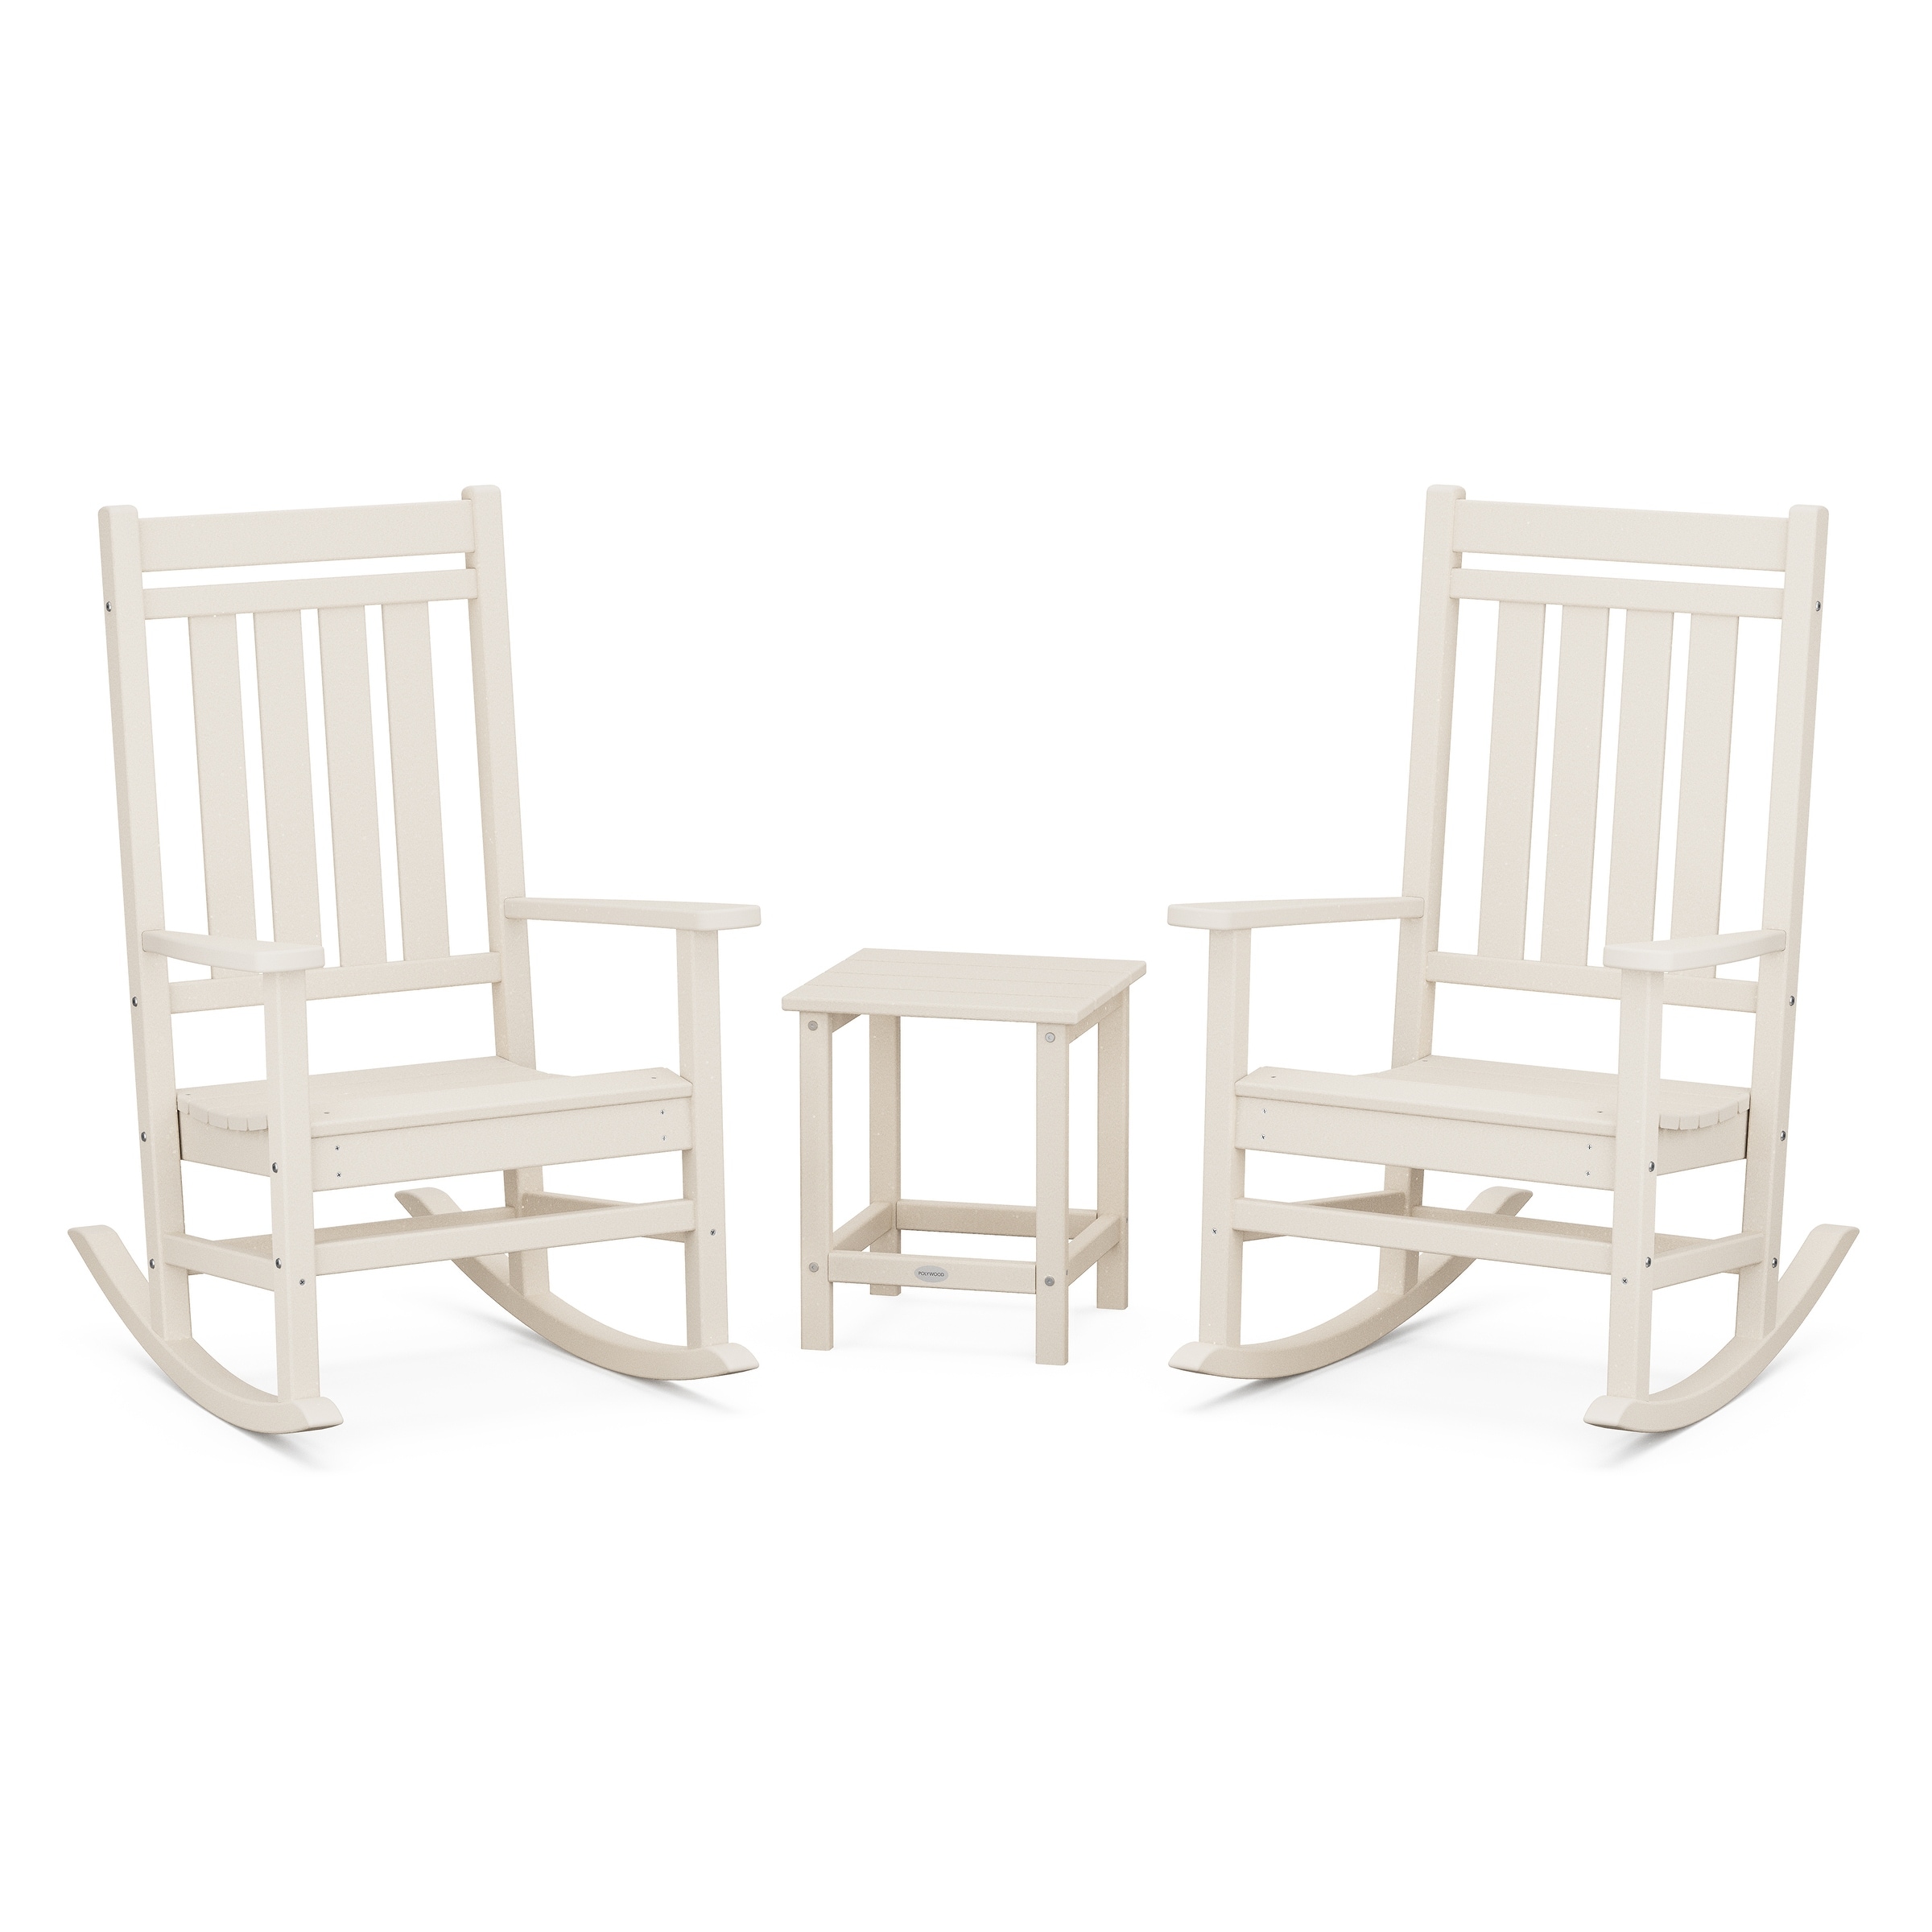 Polywood Estate 3-piece Rocking Chair Set With Long Island 18 Side Table